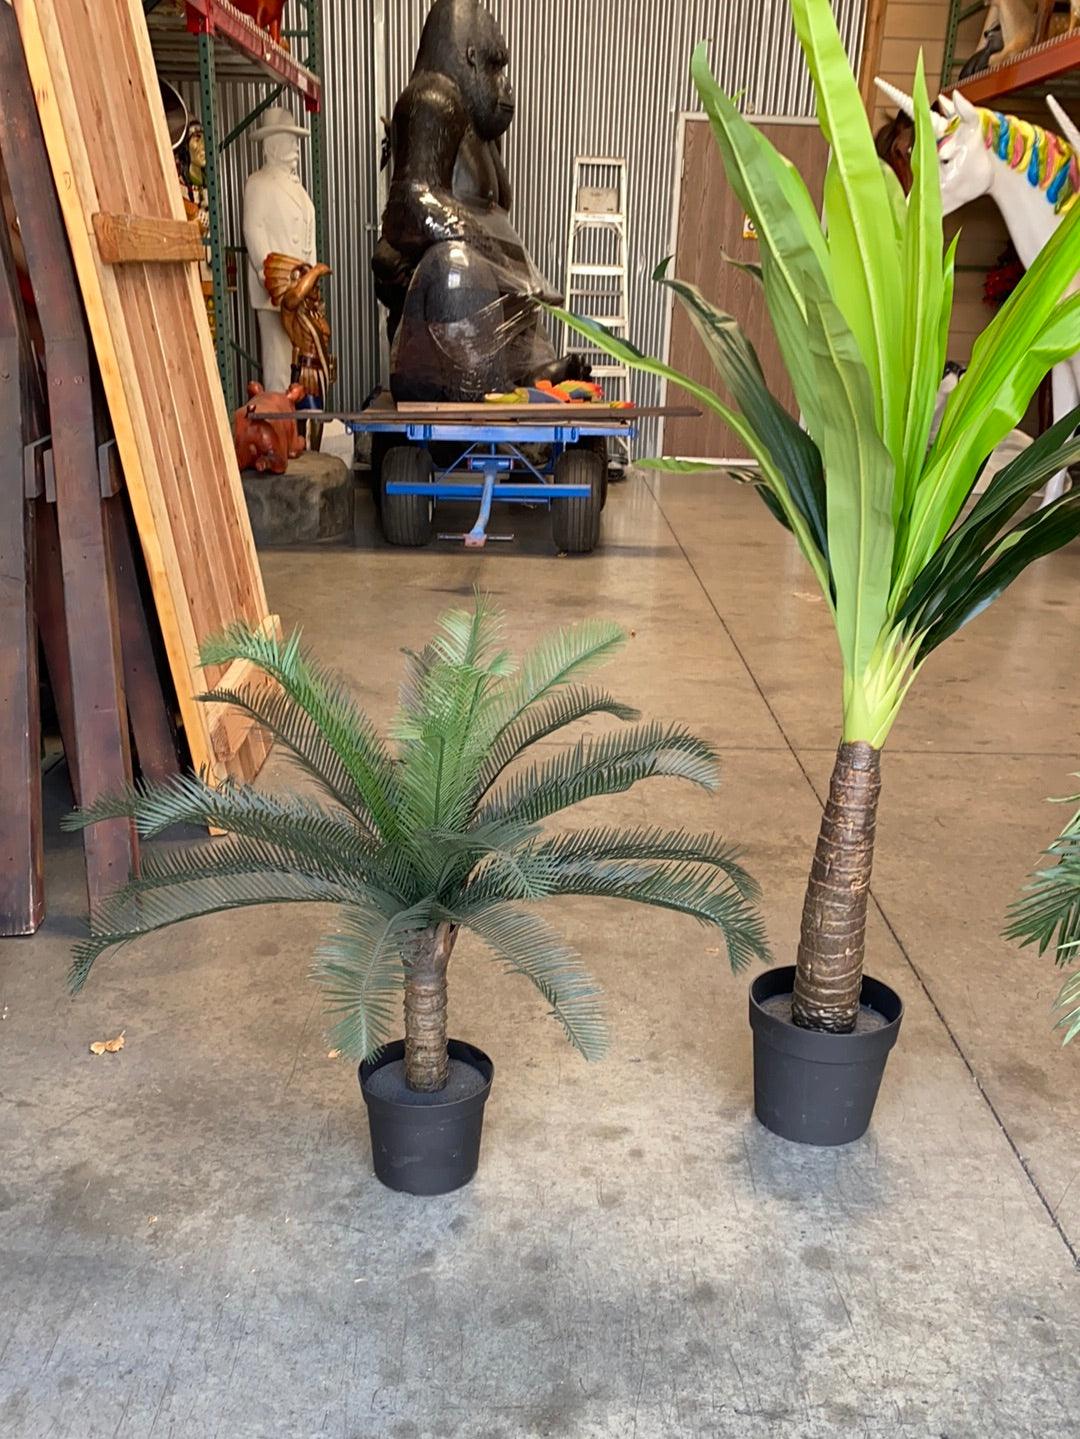 Small Artificial Palm Tree